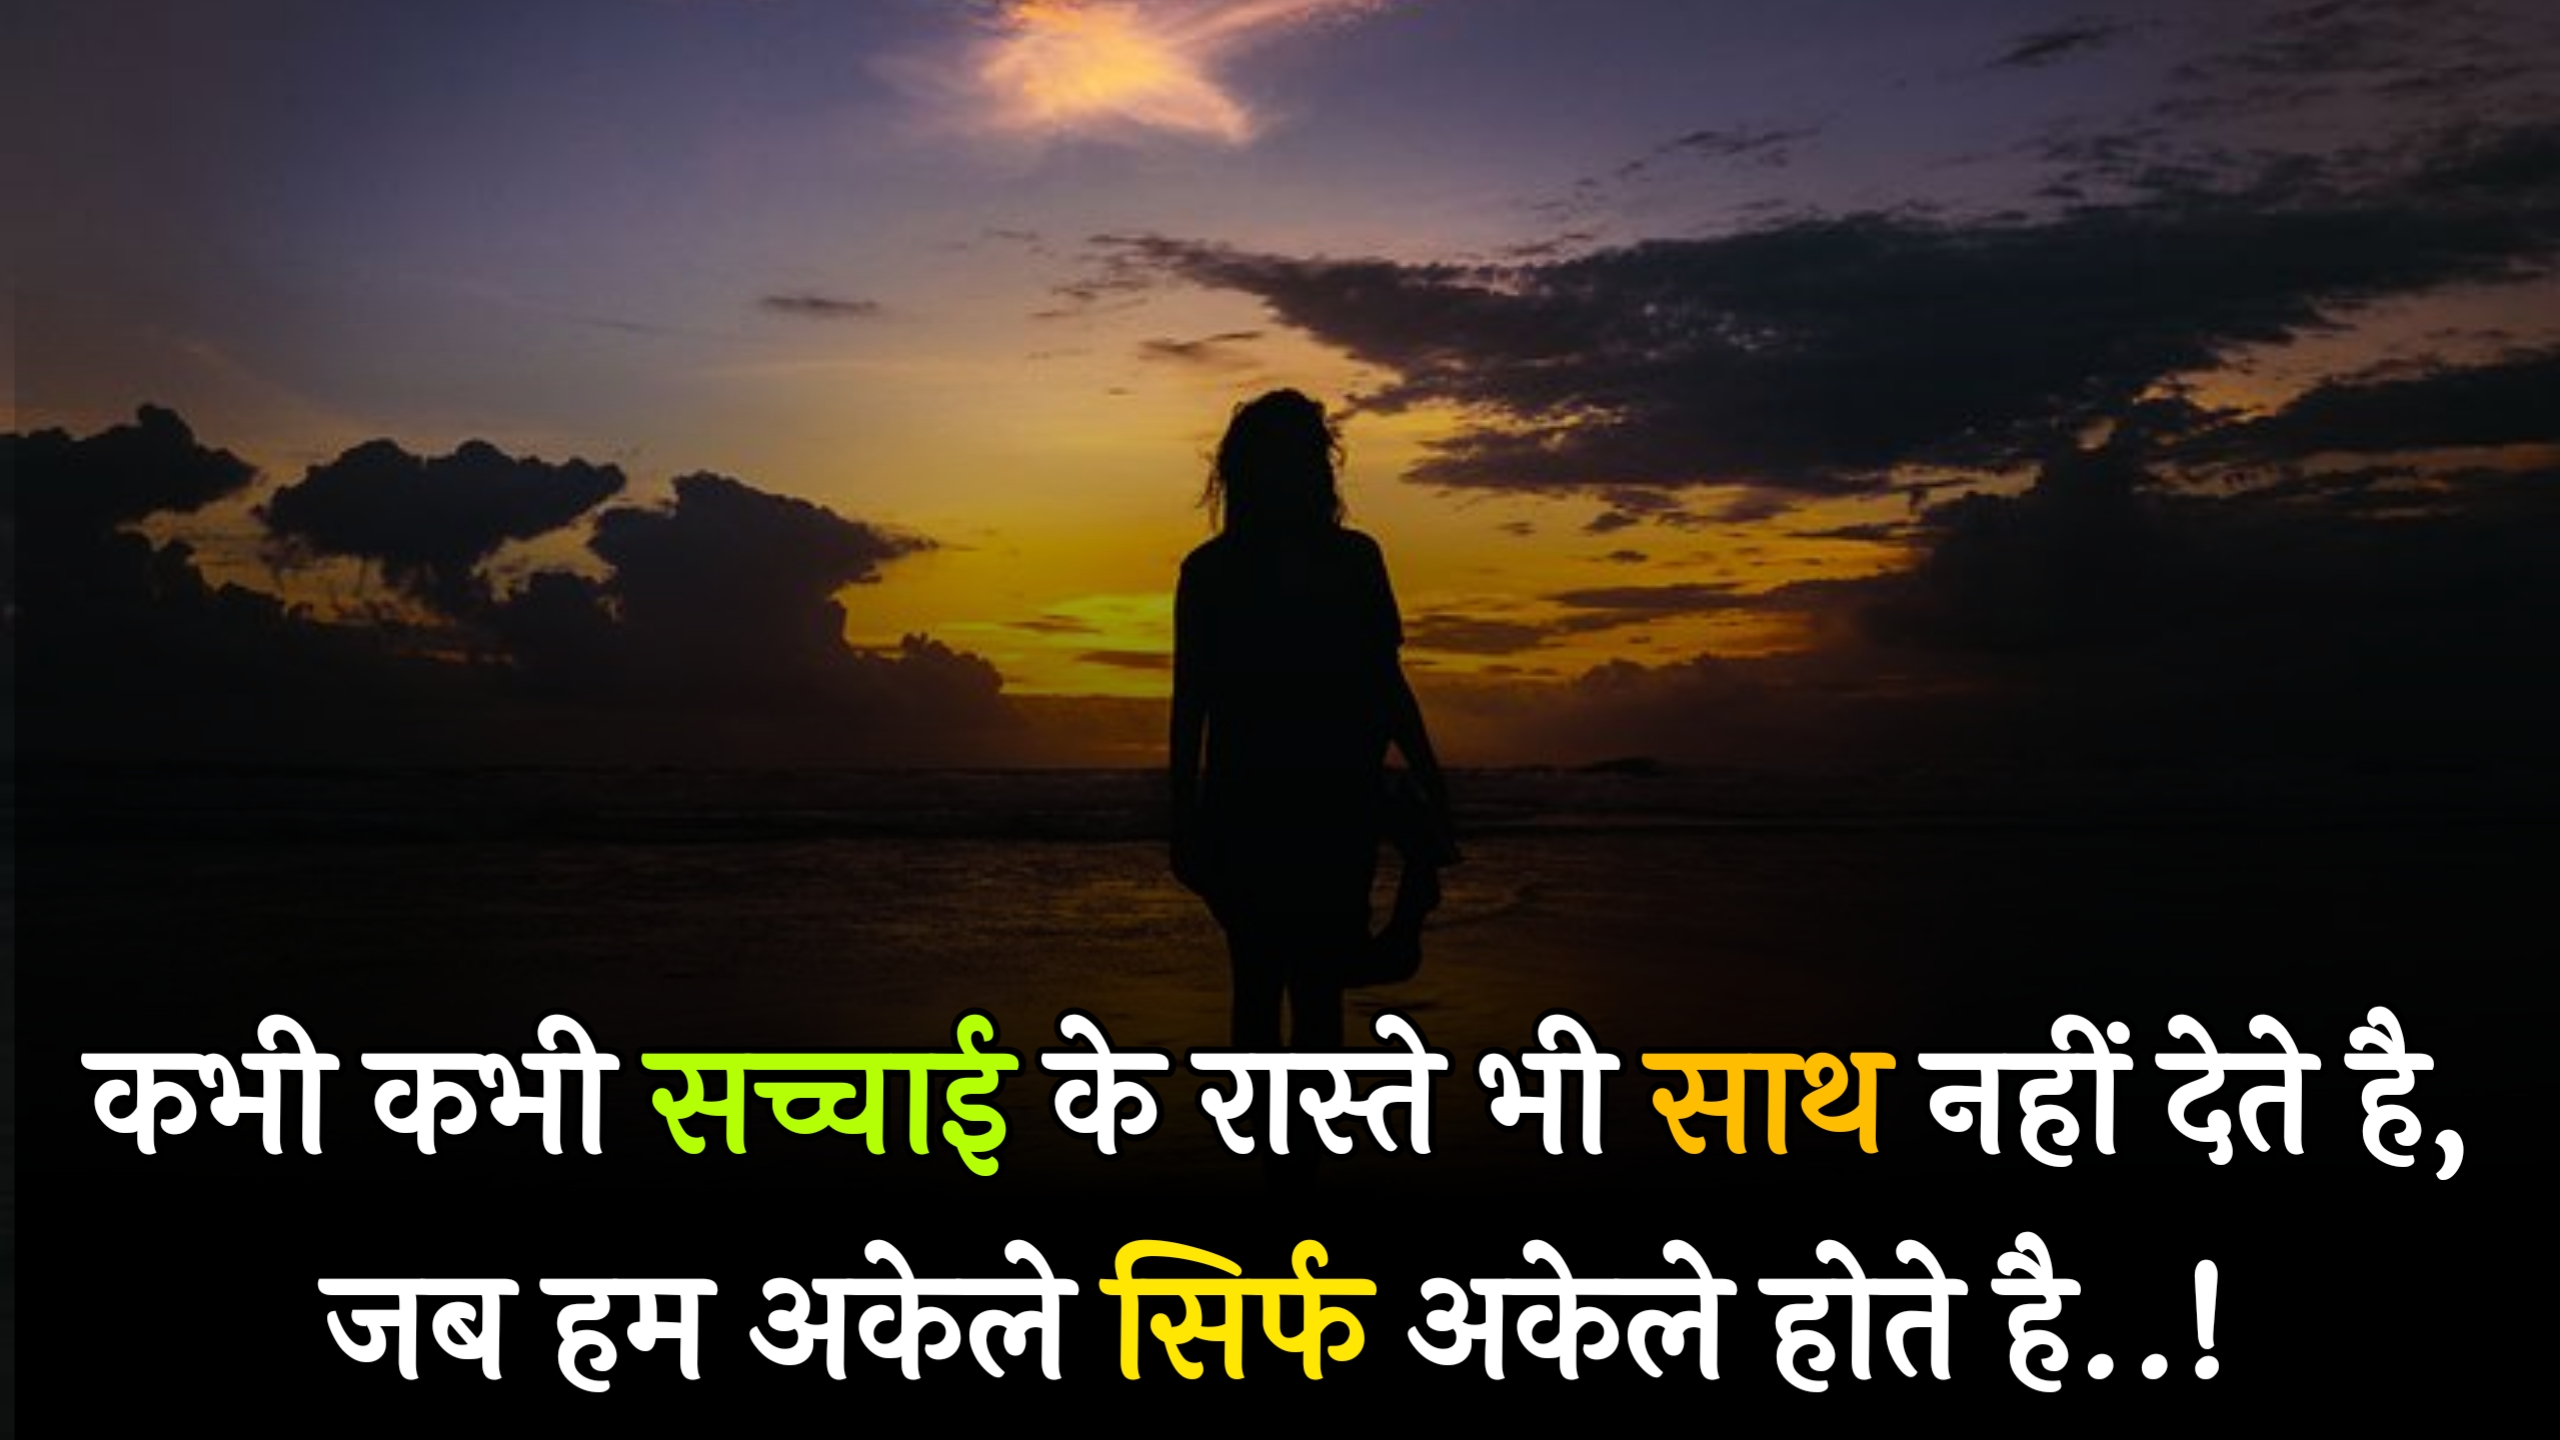 Alone cry sad quotes in hindi ,sad quotes in Hindi,Alone quotes in Hindi,Alone sad quotes in hindi , Attitude happy Alone quotes in hindi,Sad status in hindi ,sad shayari in Hindi, Alone status in hindi ,Alone shayari in Hindi